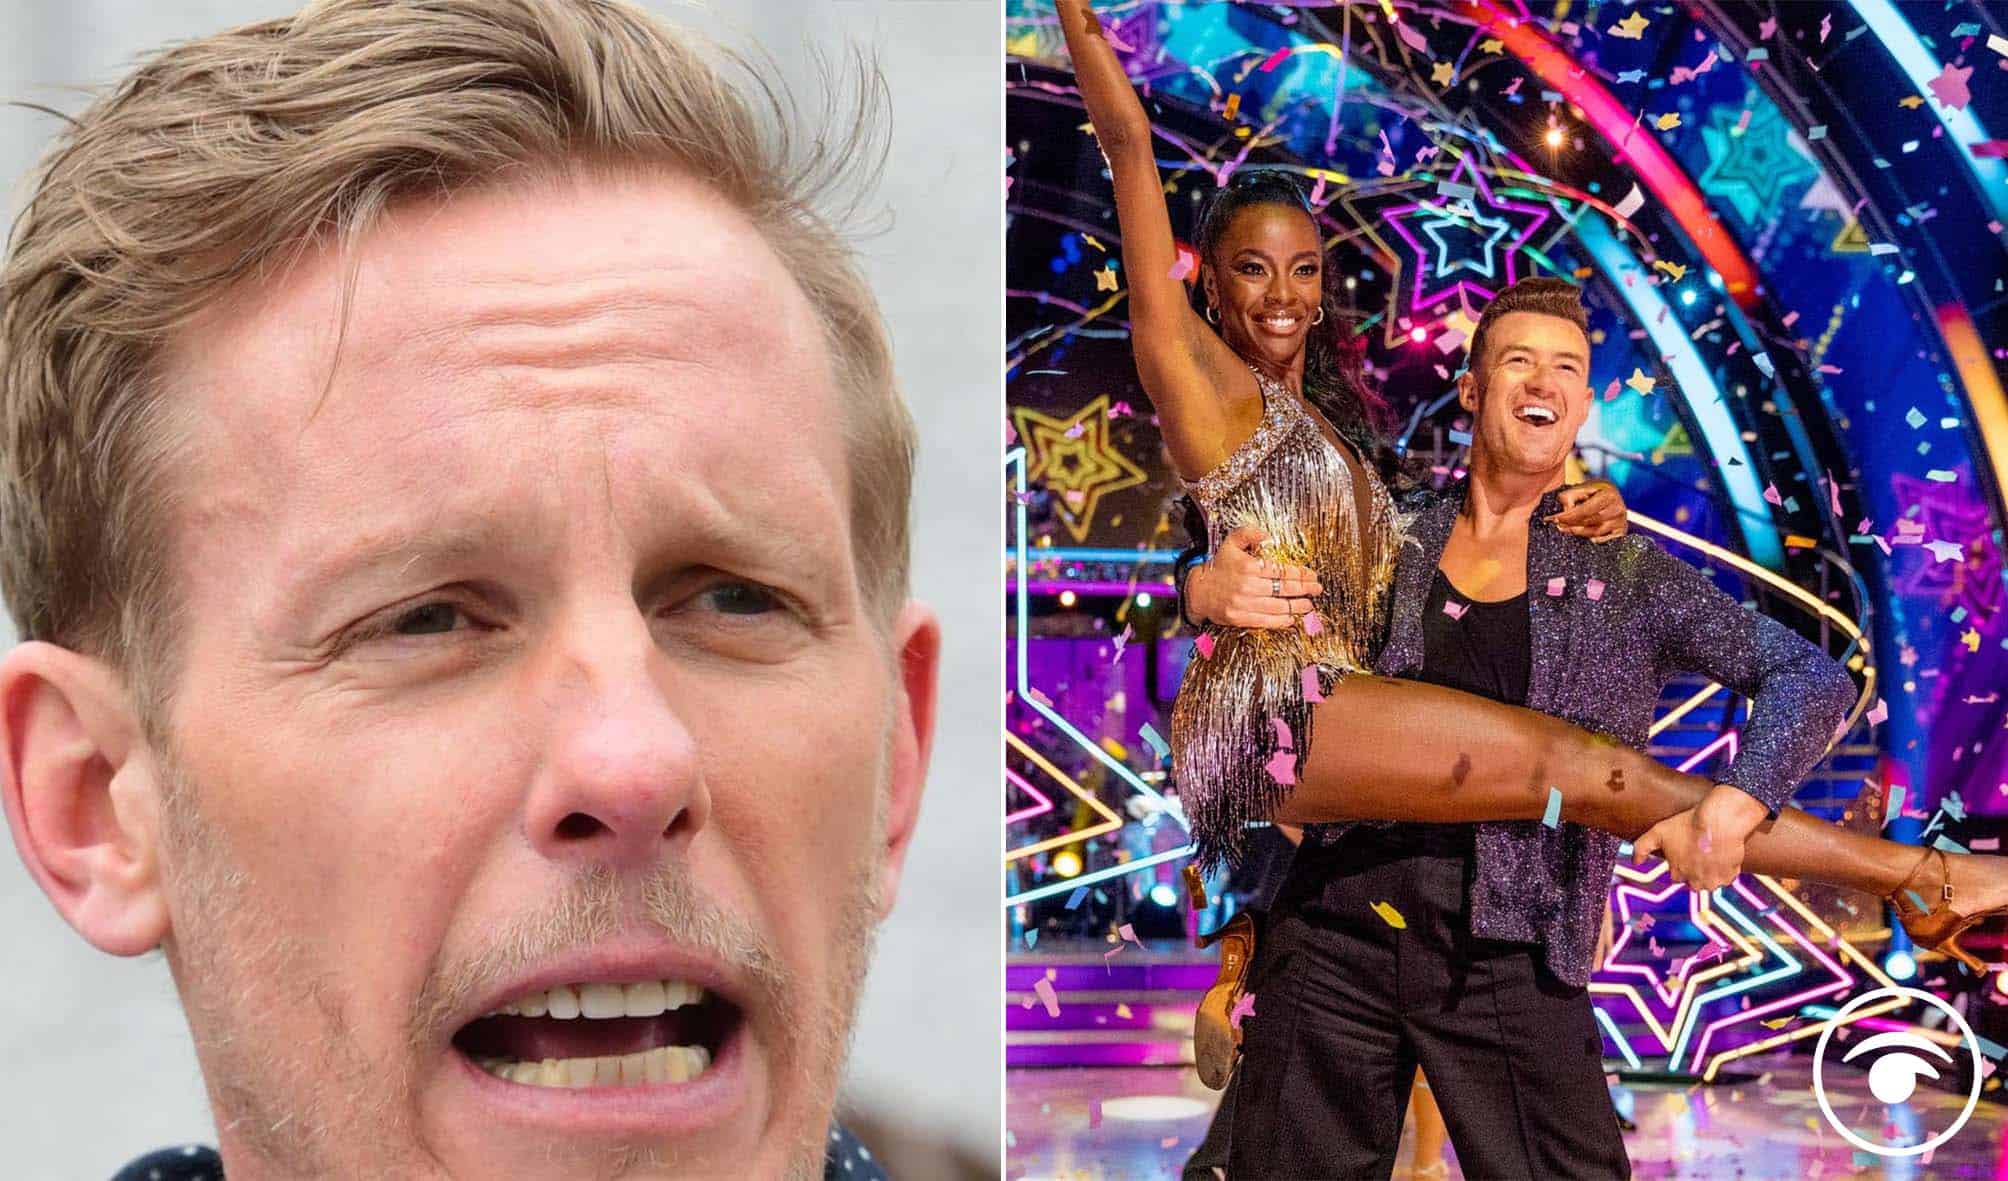 Laurence Fox slammed for comparing anti-vaxxers to ‘HIV positive dancers’